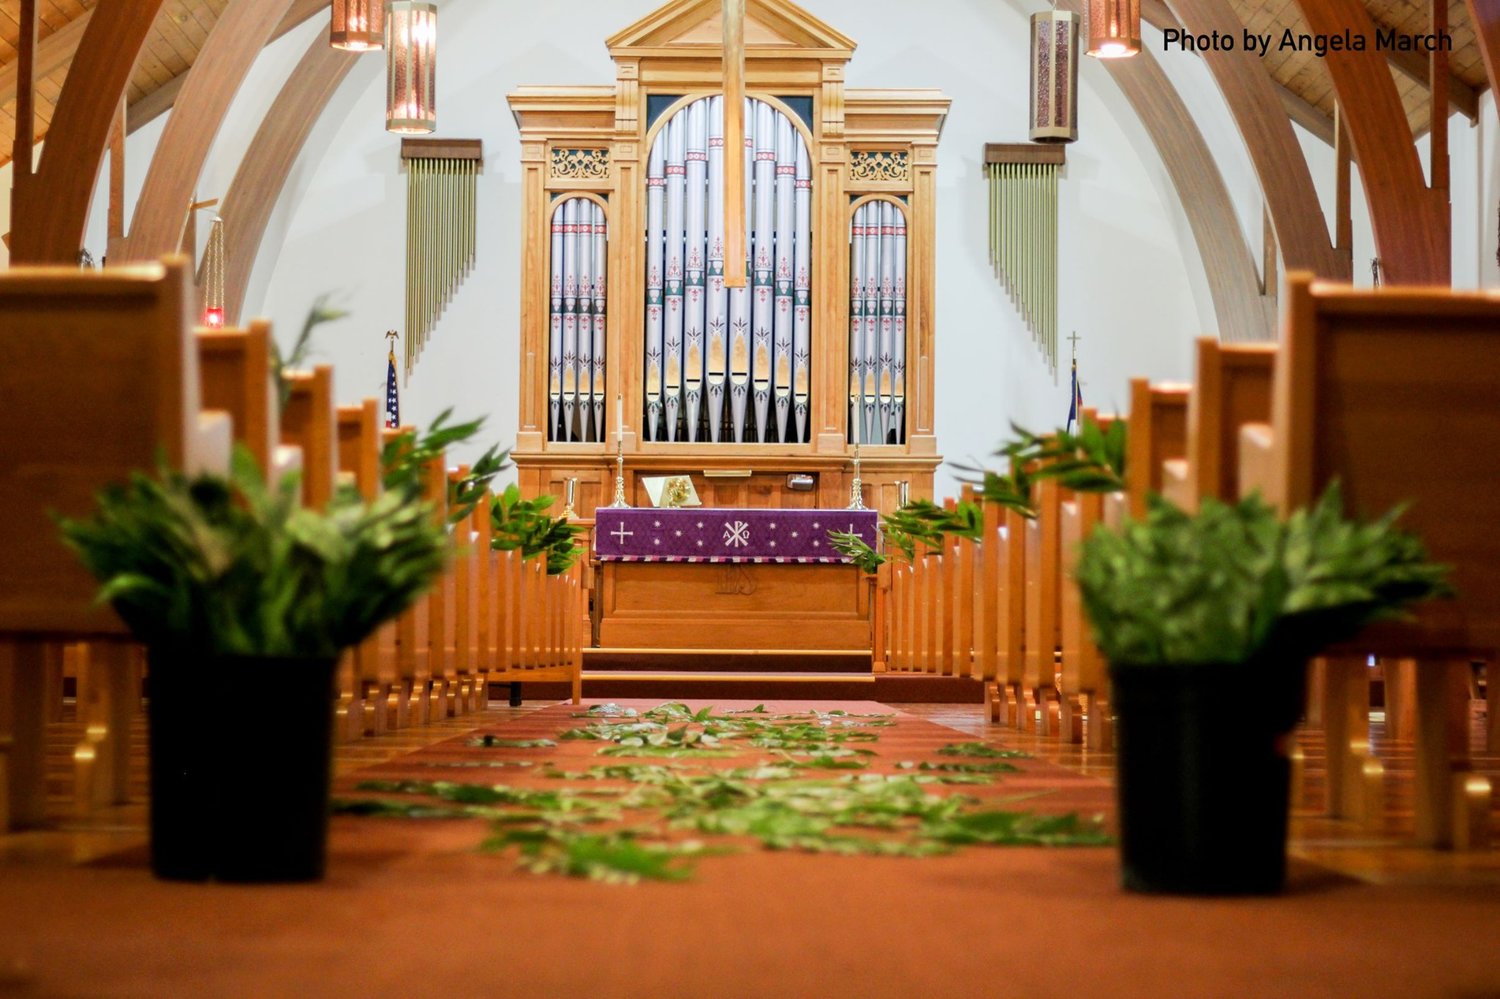 Angela March provided this photograph of the St. John ‘s Lutheran Church sanctuary.